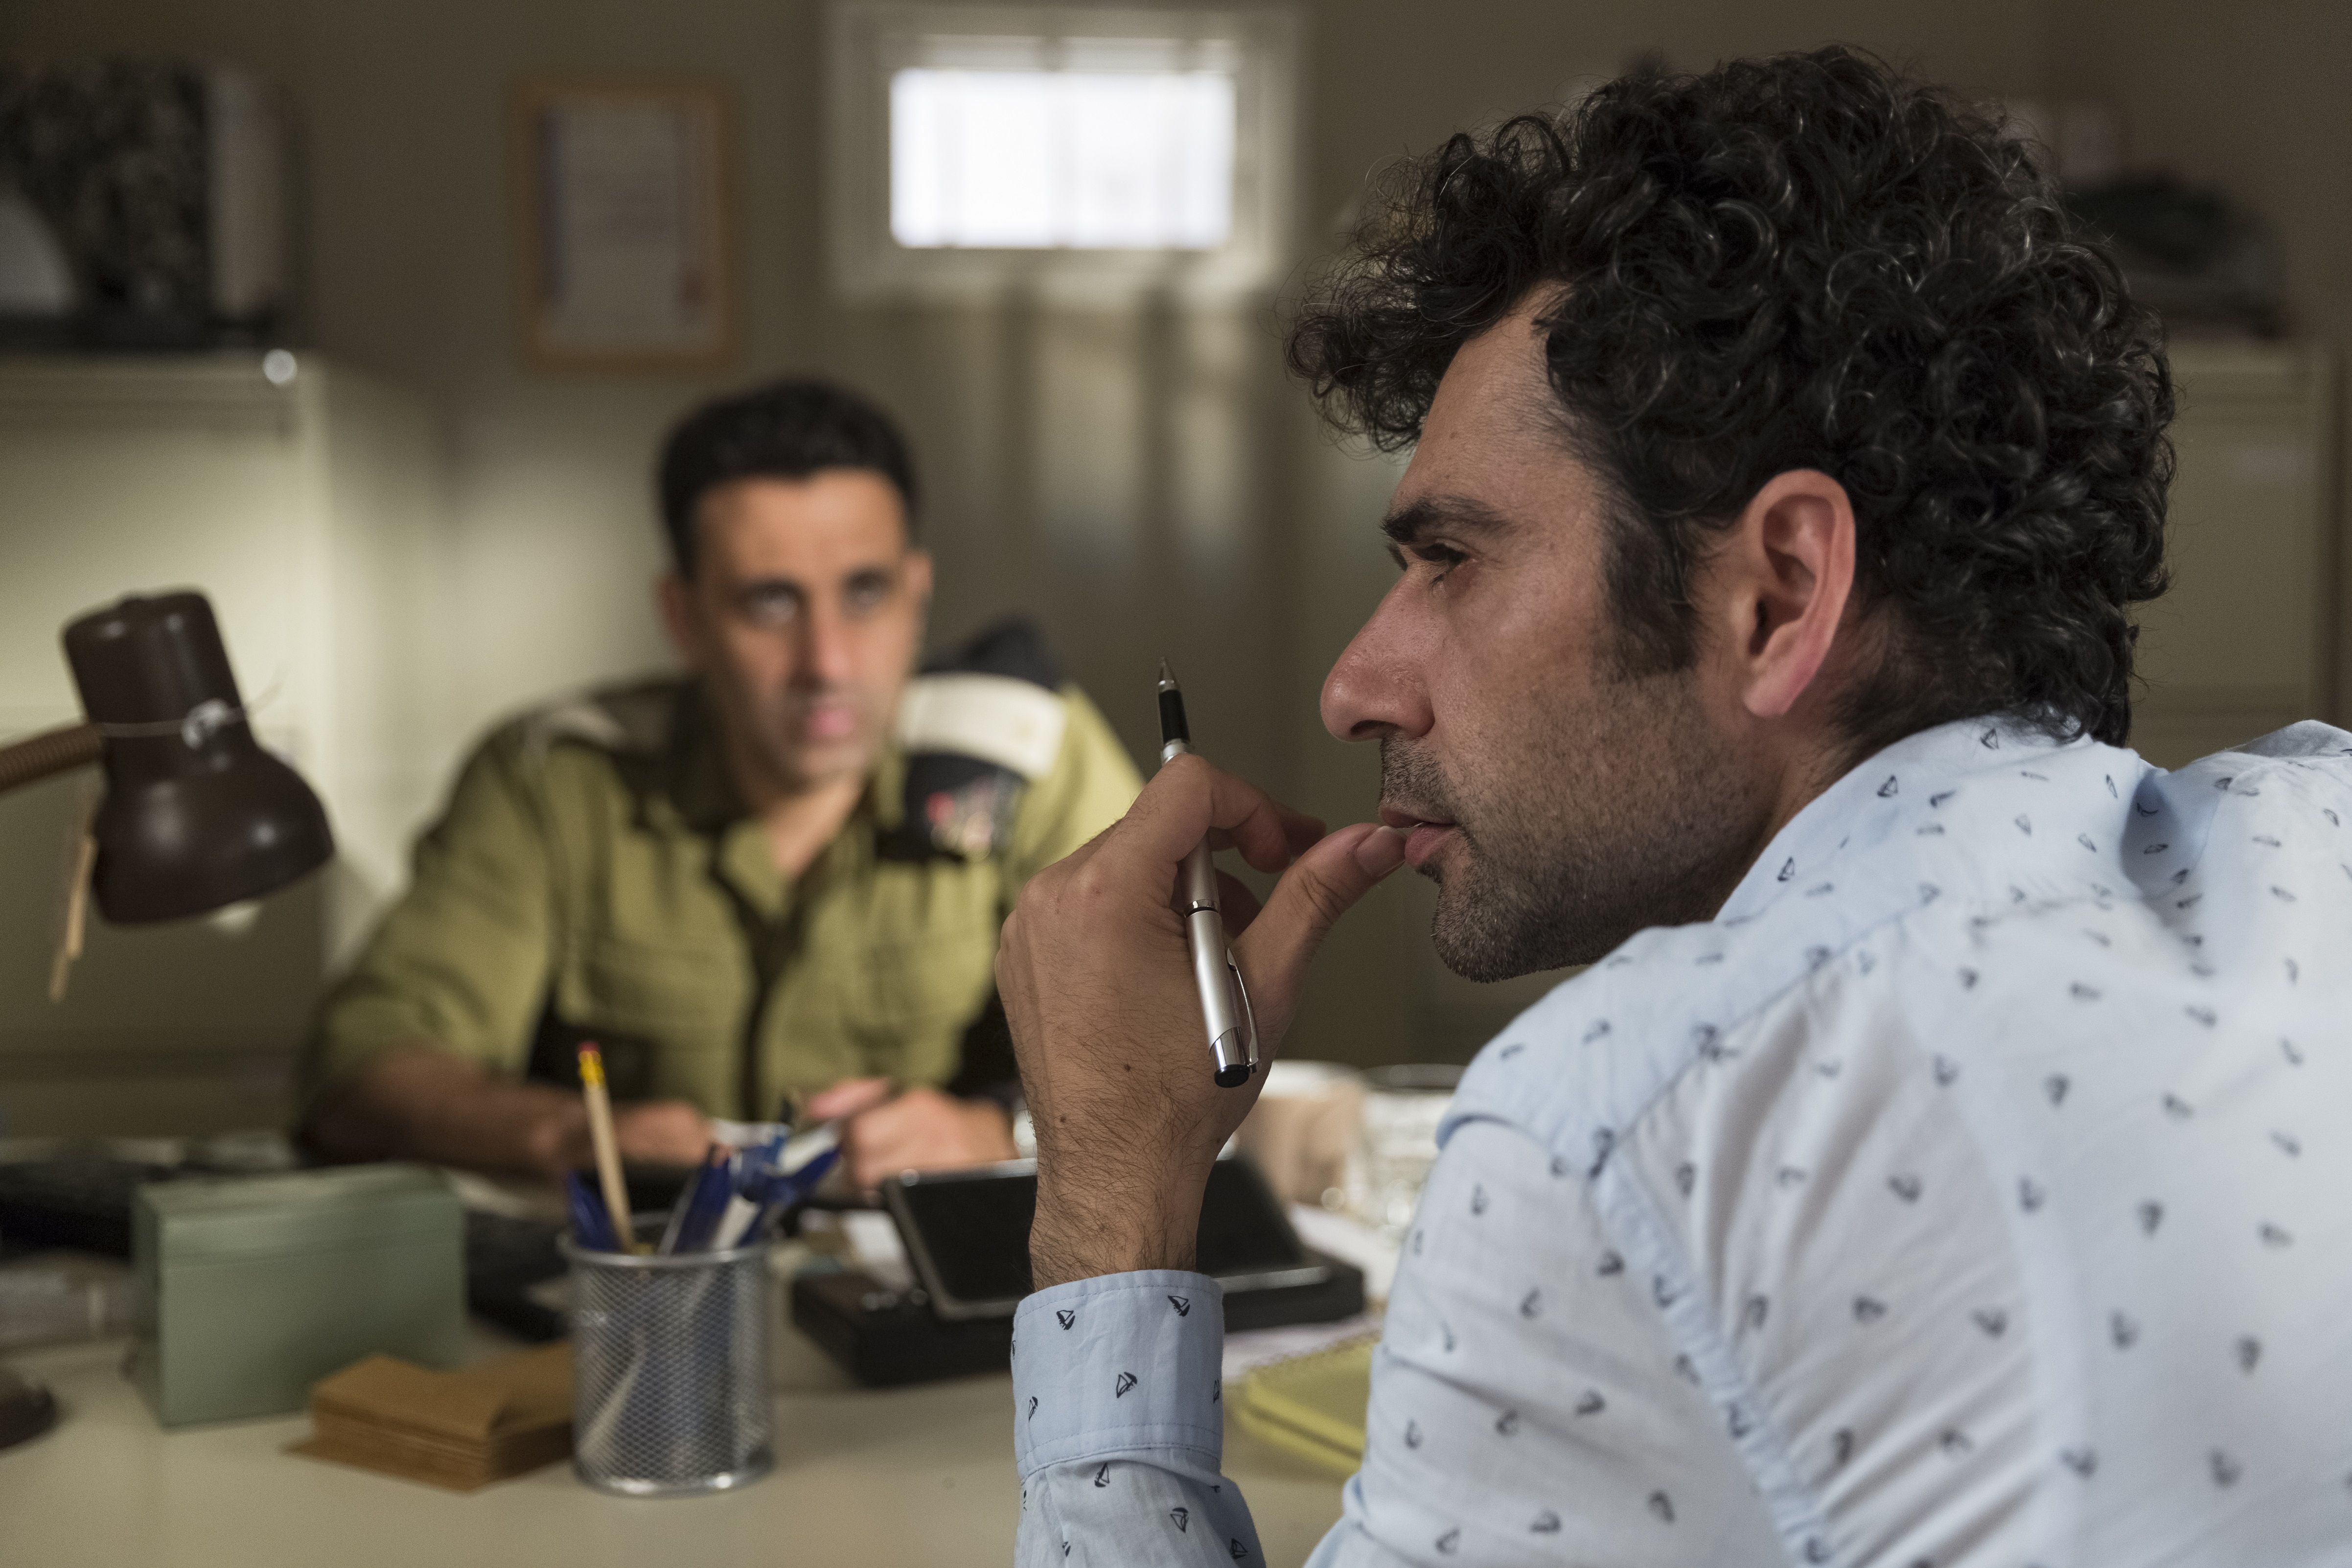 Yaniv Biton as “Assi” (left) and Kais Nashif as “Salam” (right) in TEL AVIV ON FIRE directed by Sameh Zoabi.